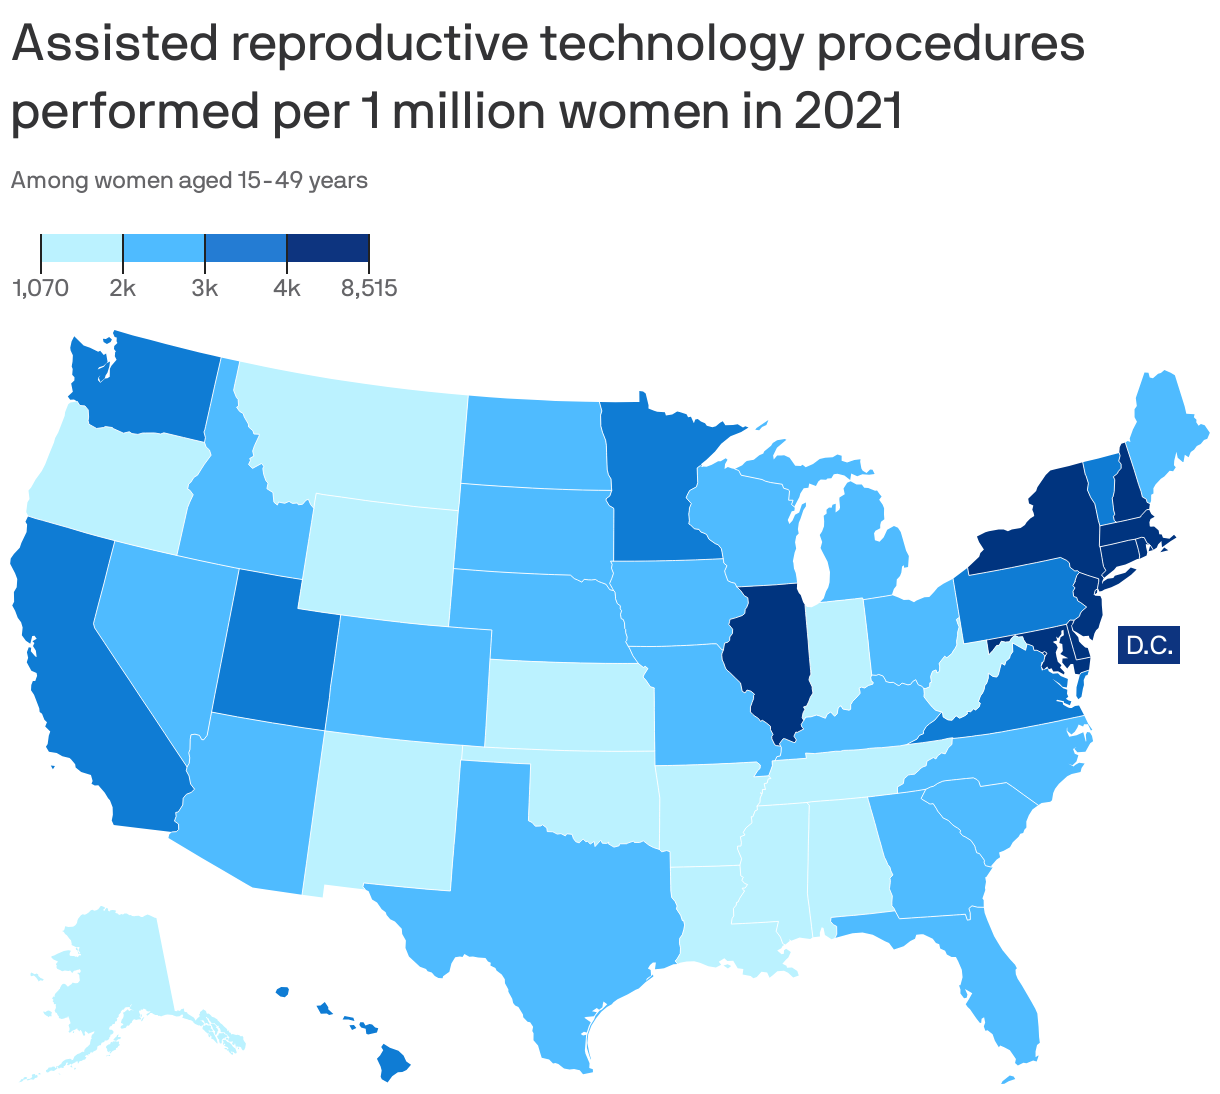 Assisted reproductive technology procedures performed per 1 million women in 2021